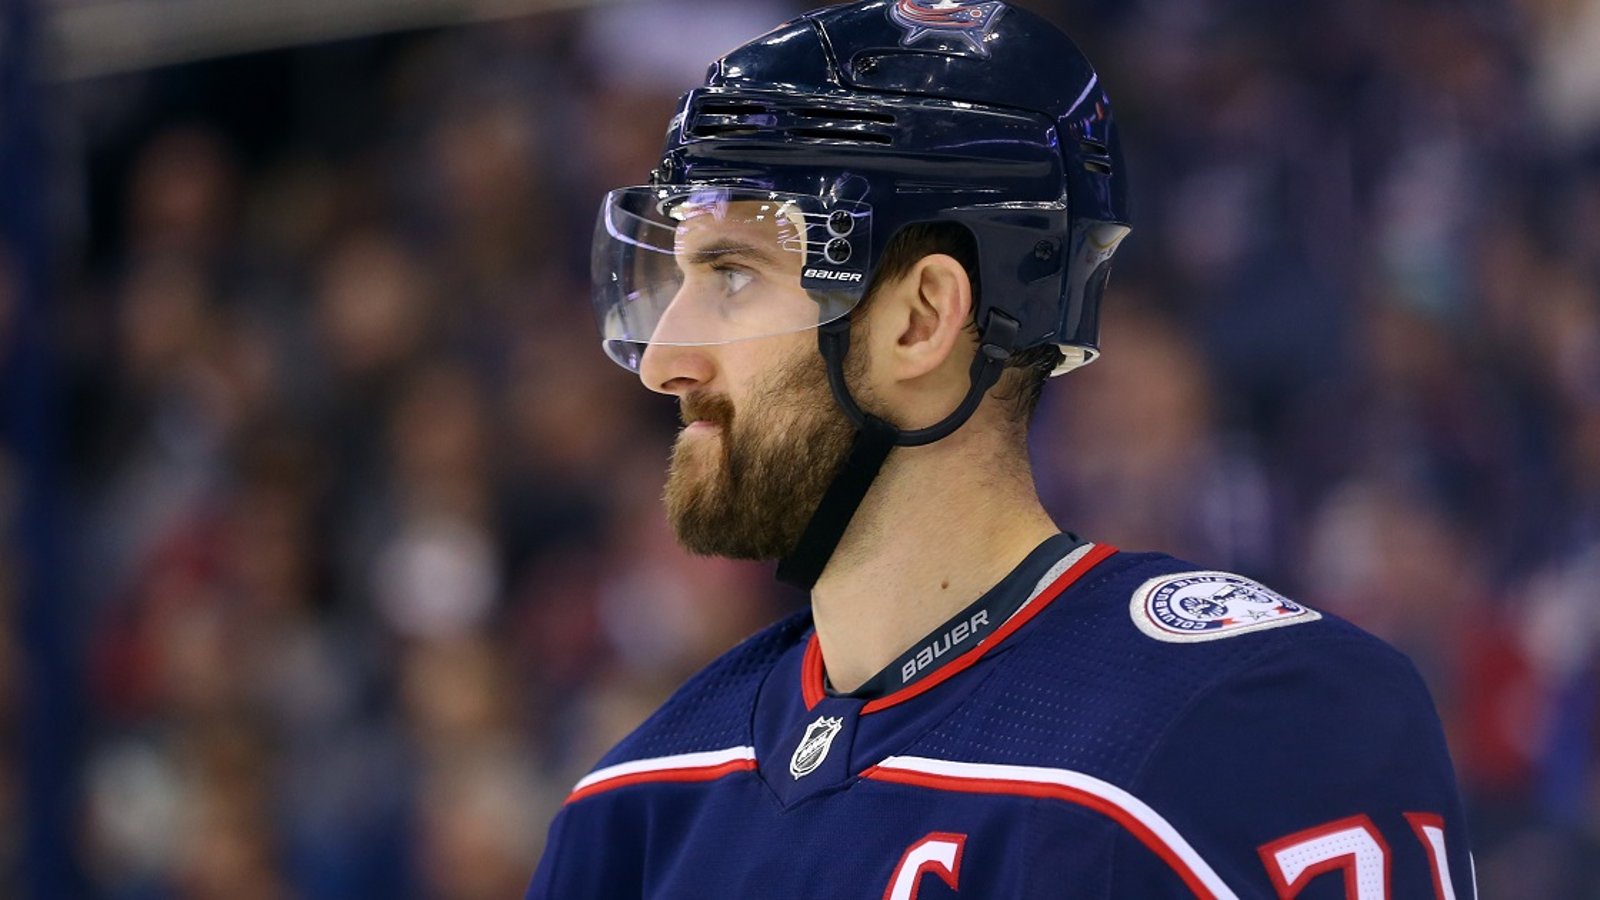 Breaking: NHL captain announces he is stepping away from his team.